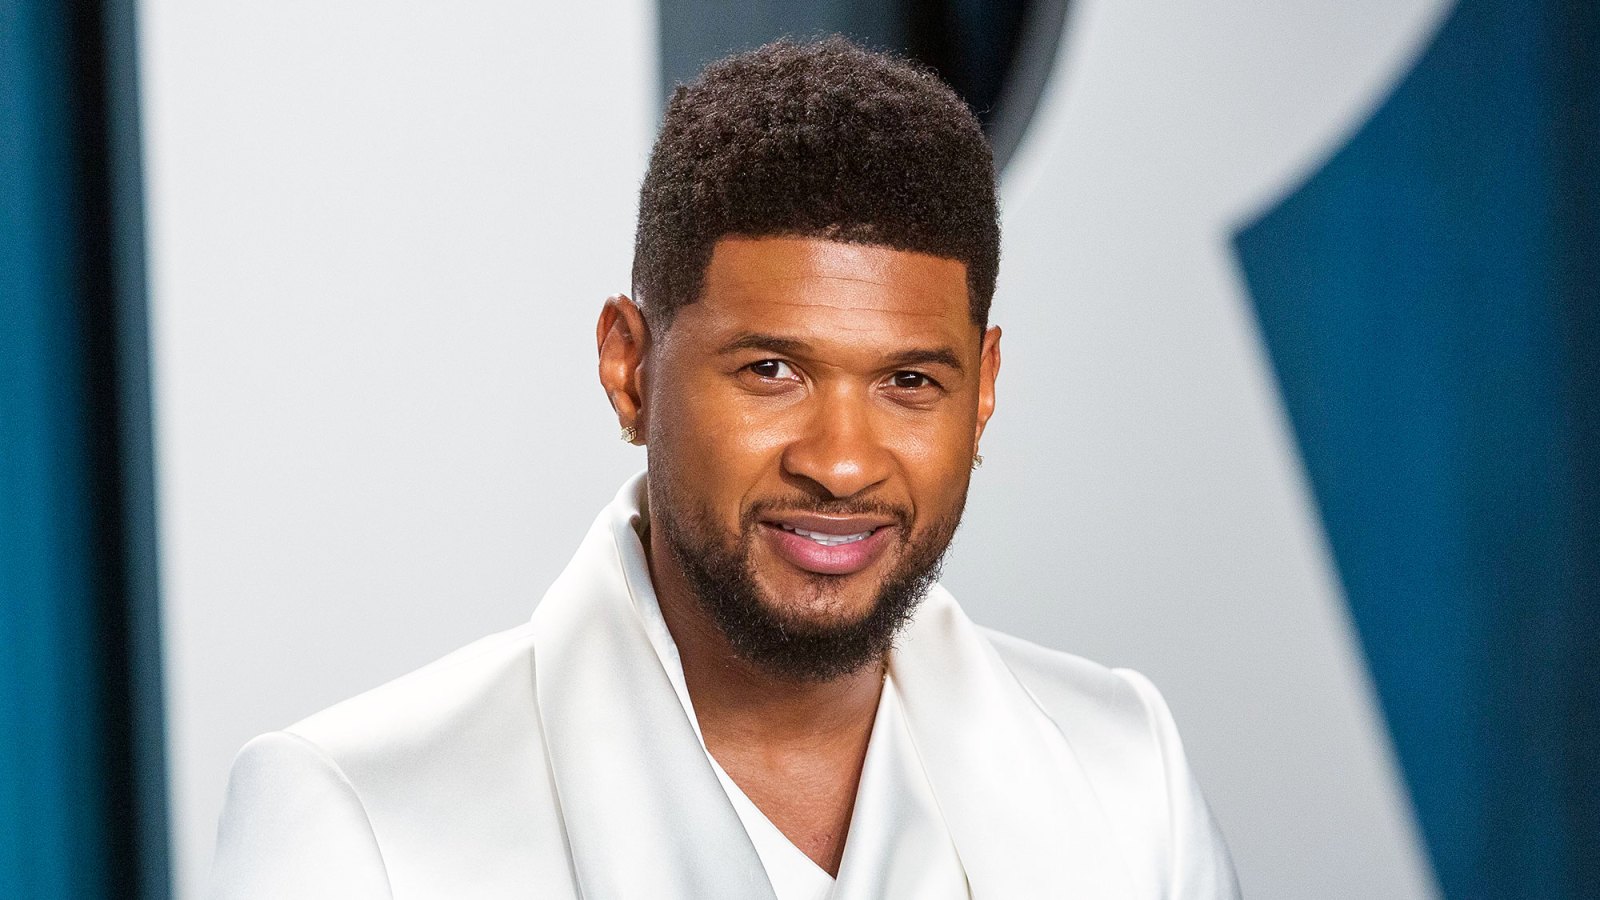 Usher attends the Vanity Fair Oscar Party Usher Reveals the Most Bizarre Food He's Eaten While in Quarantine